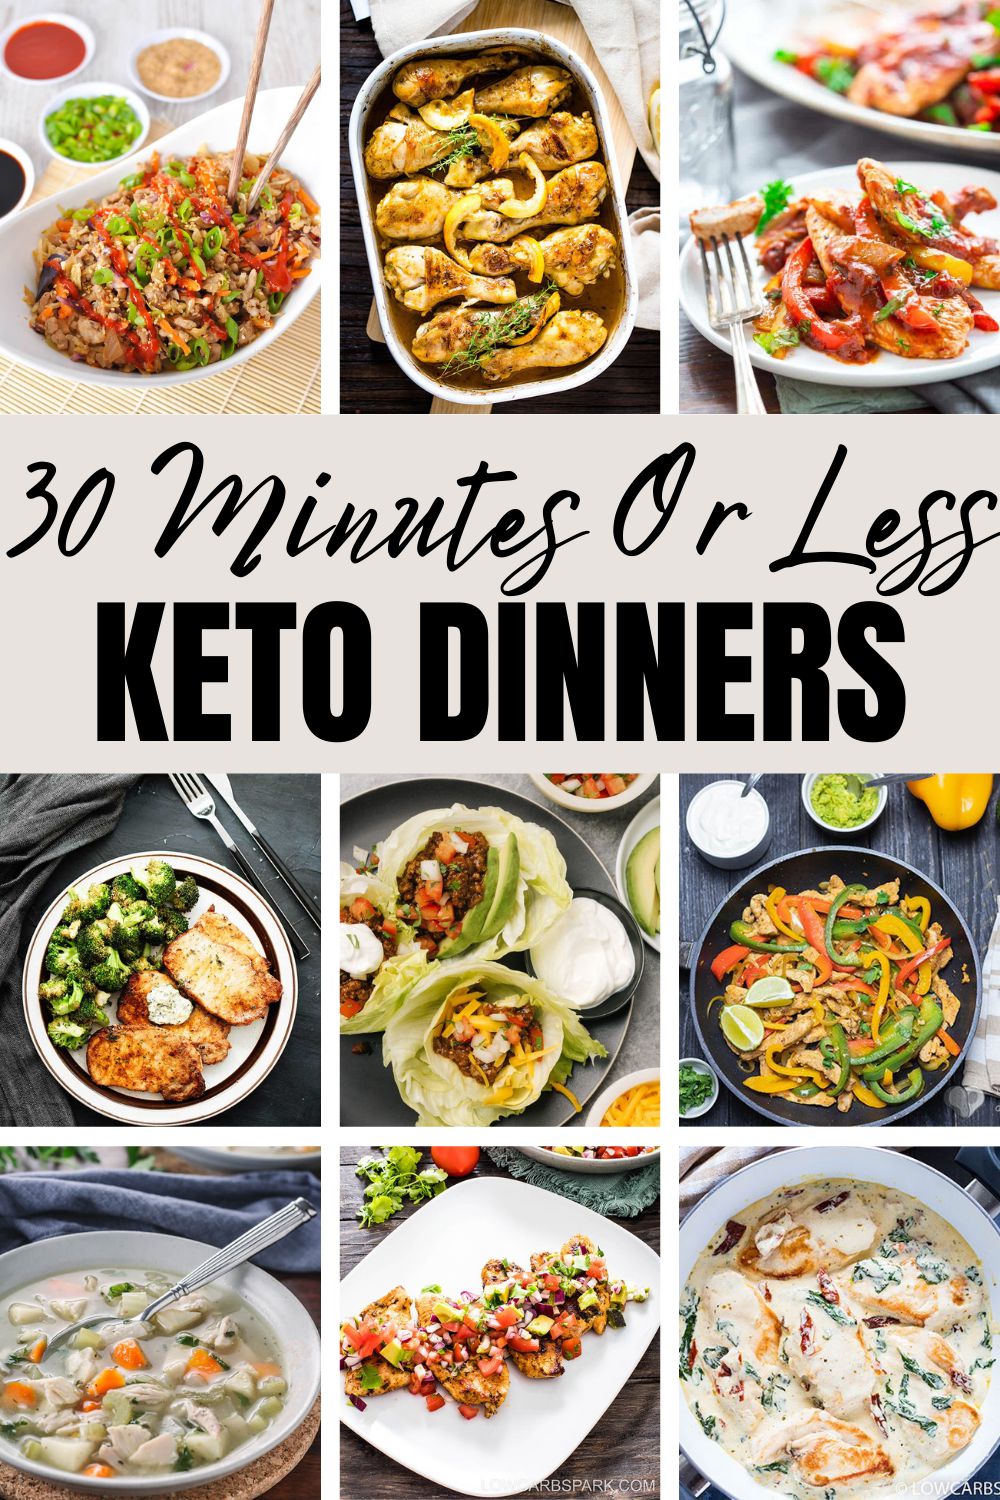 https://www.lowcarbspark.com/wp-content/uploads/2021/04/30-Minutes-Or-Less-keto-dinners.jpg